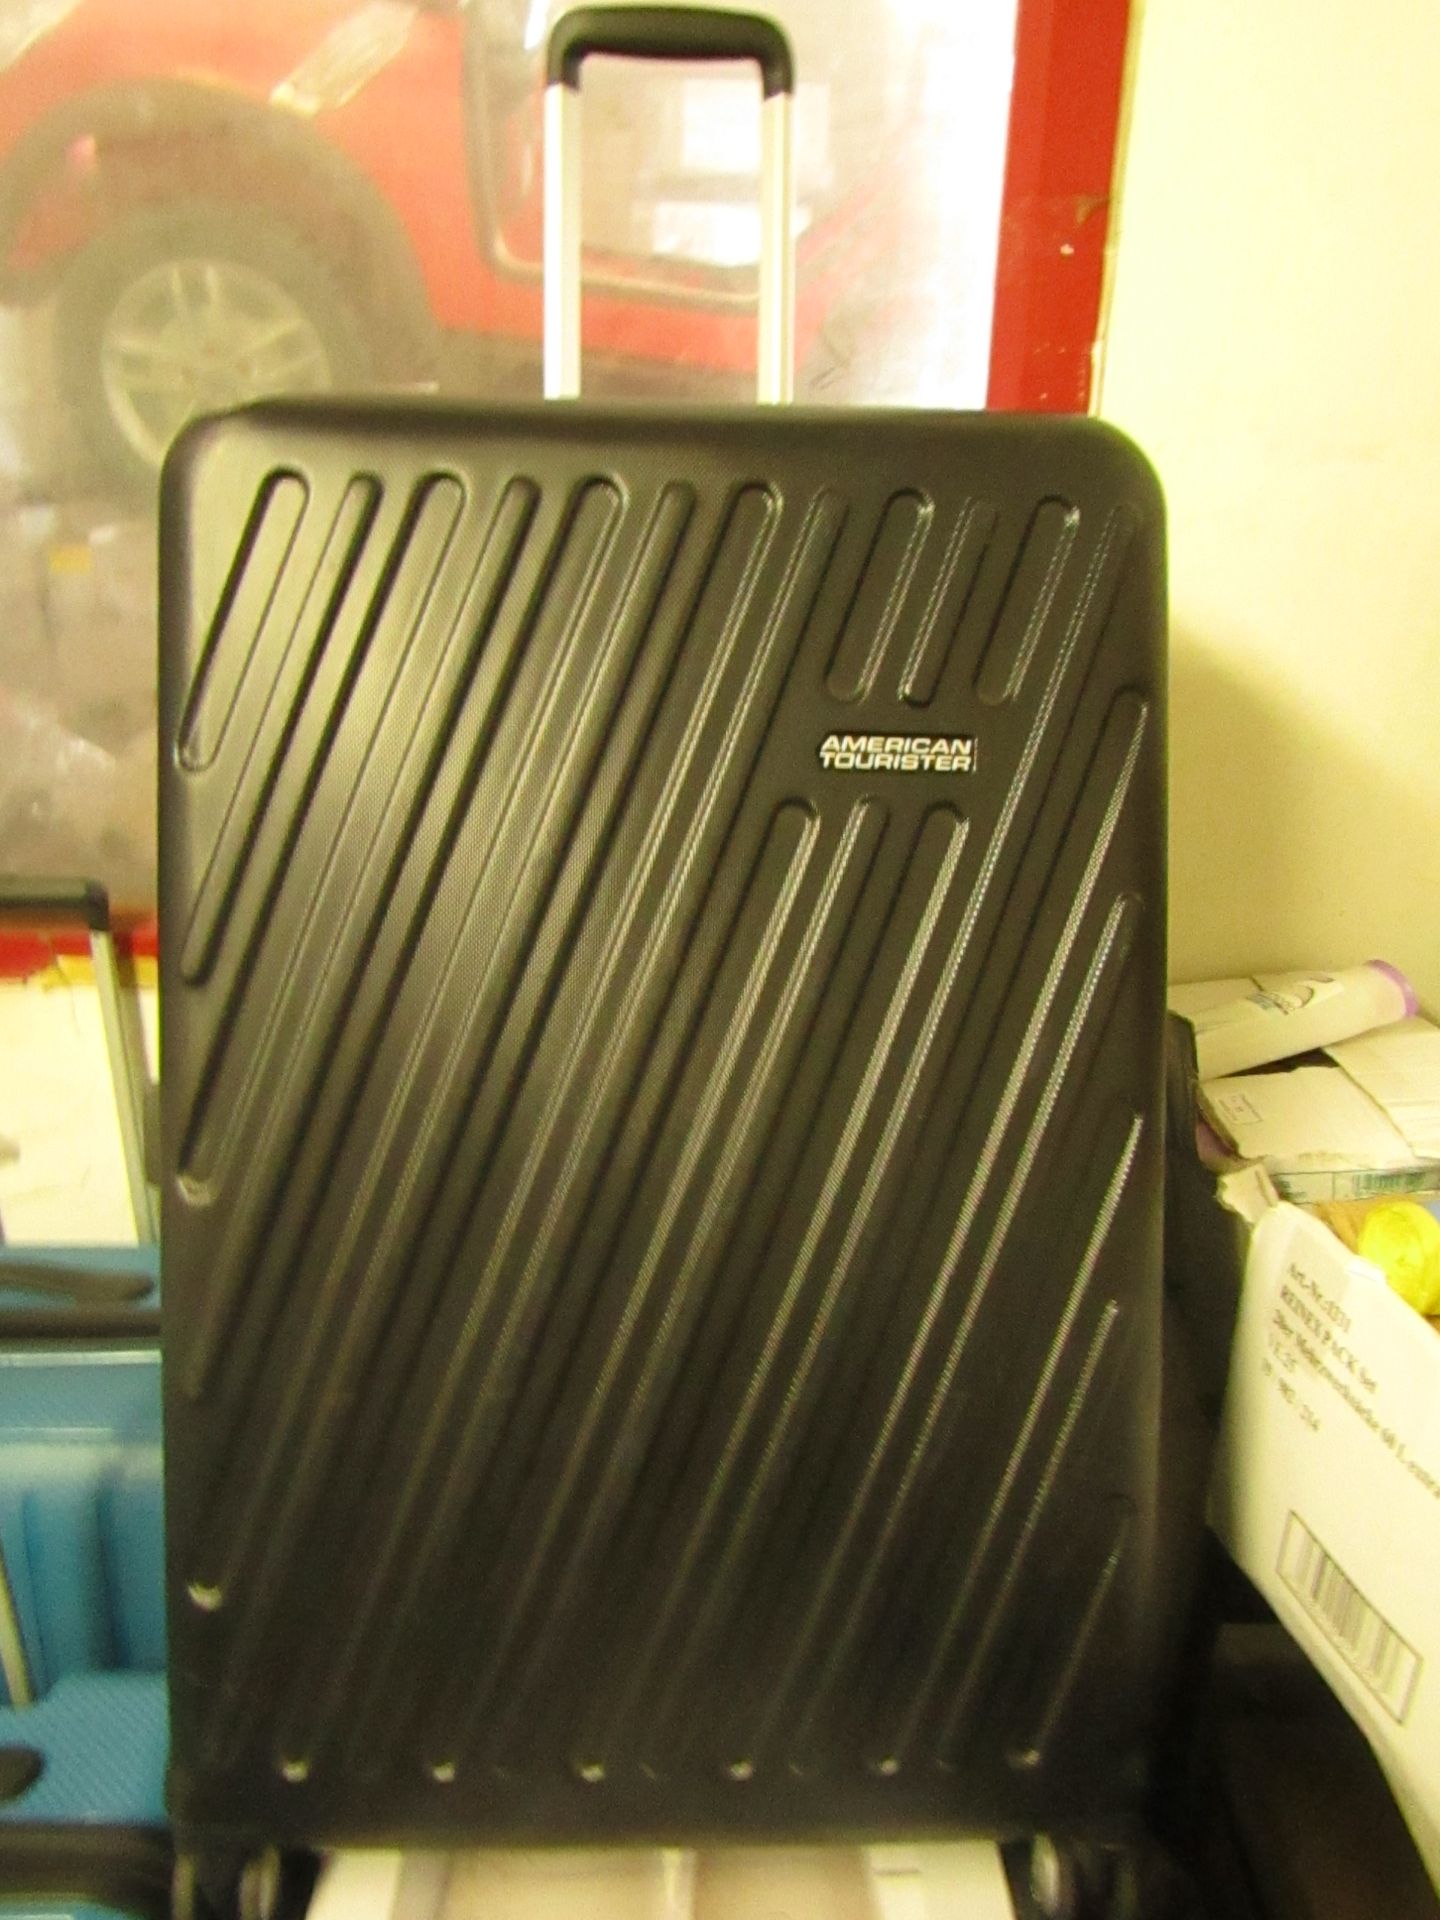 American Tourister large suitcase, has dents.